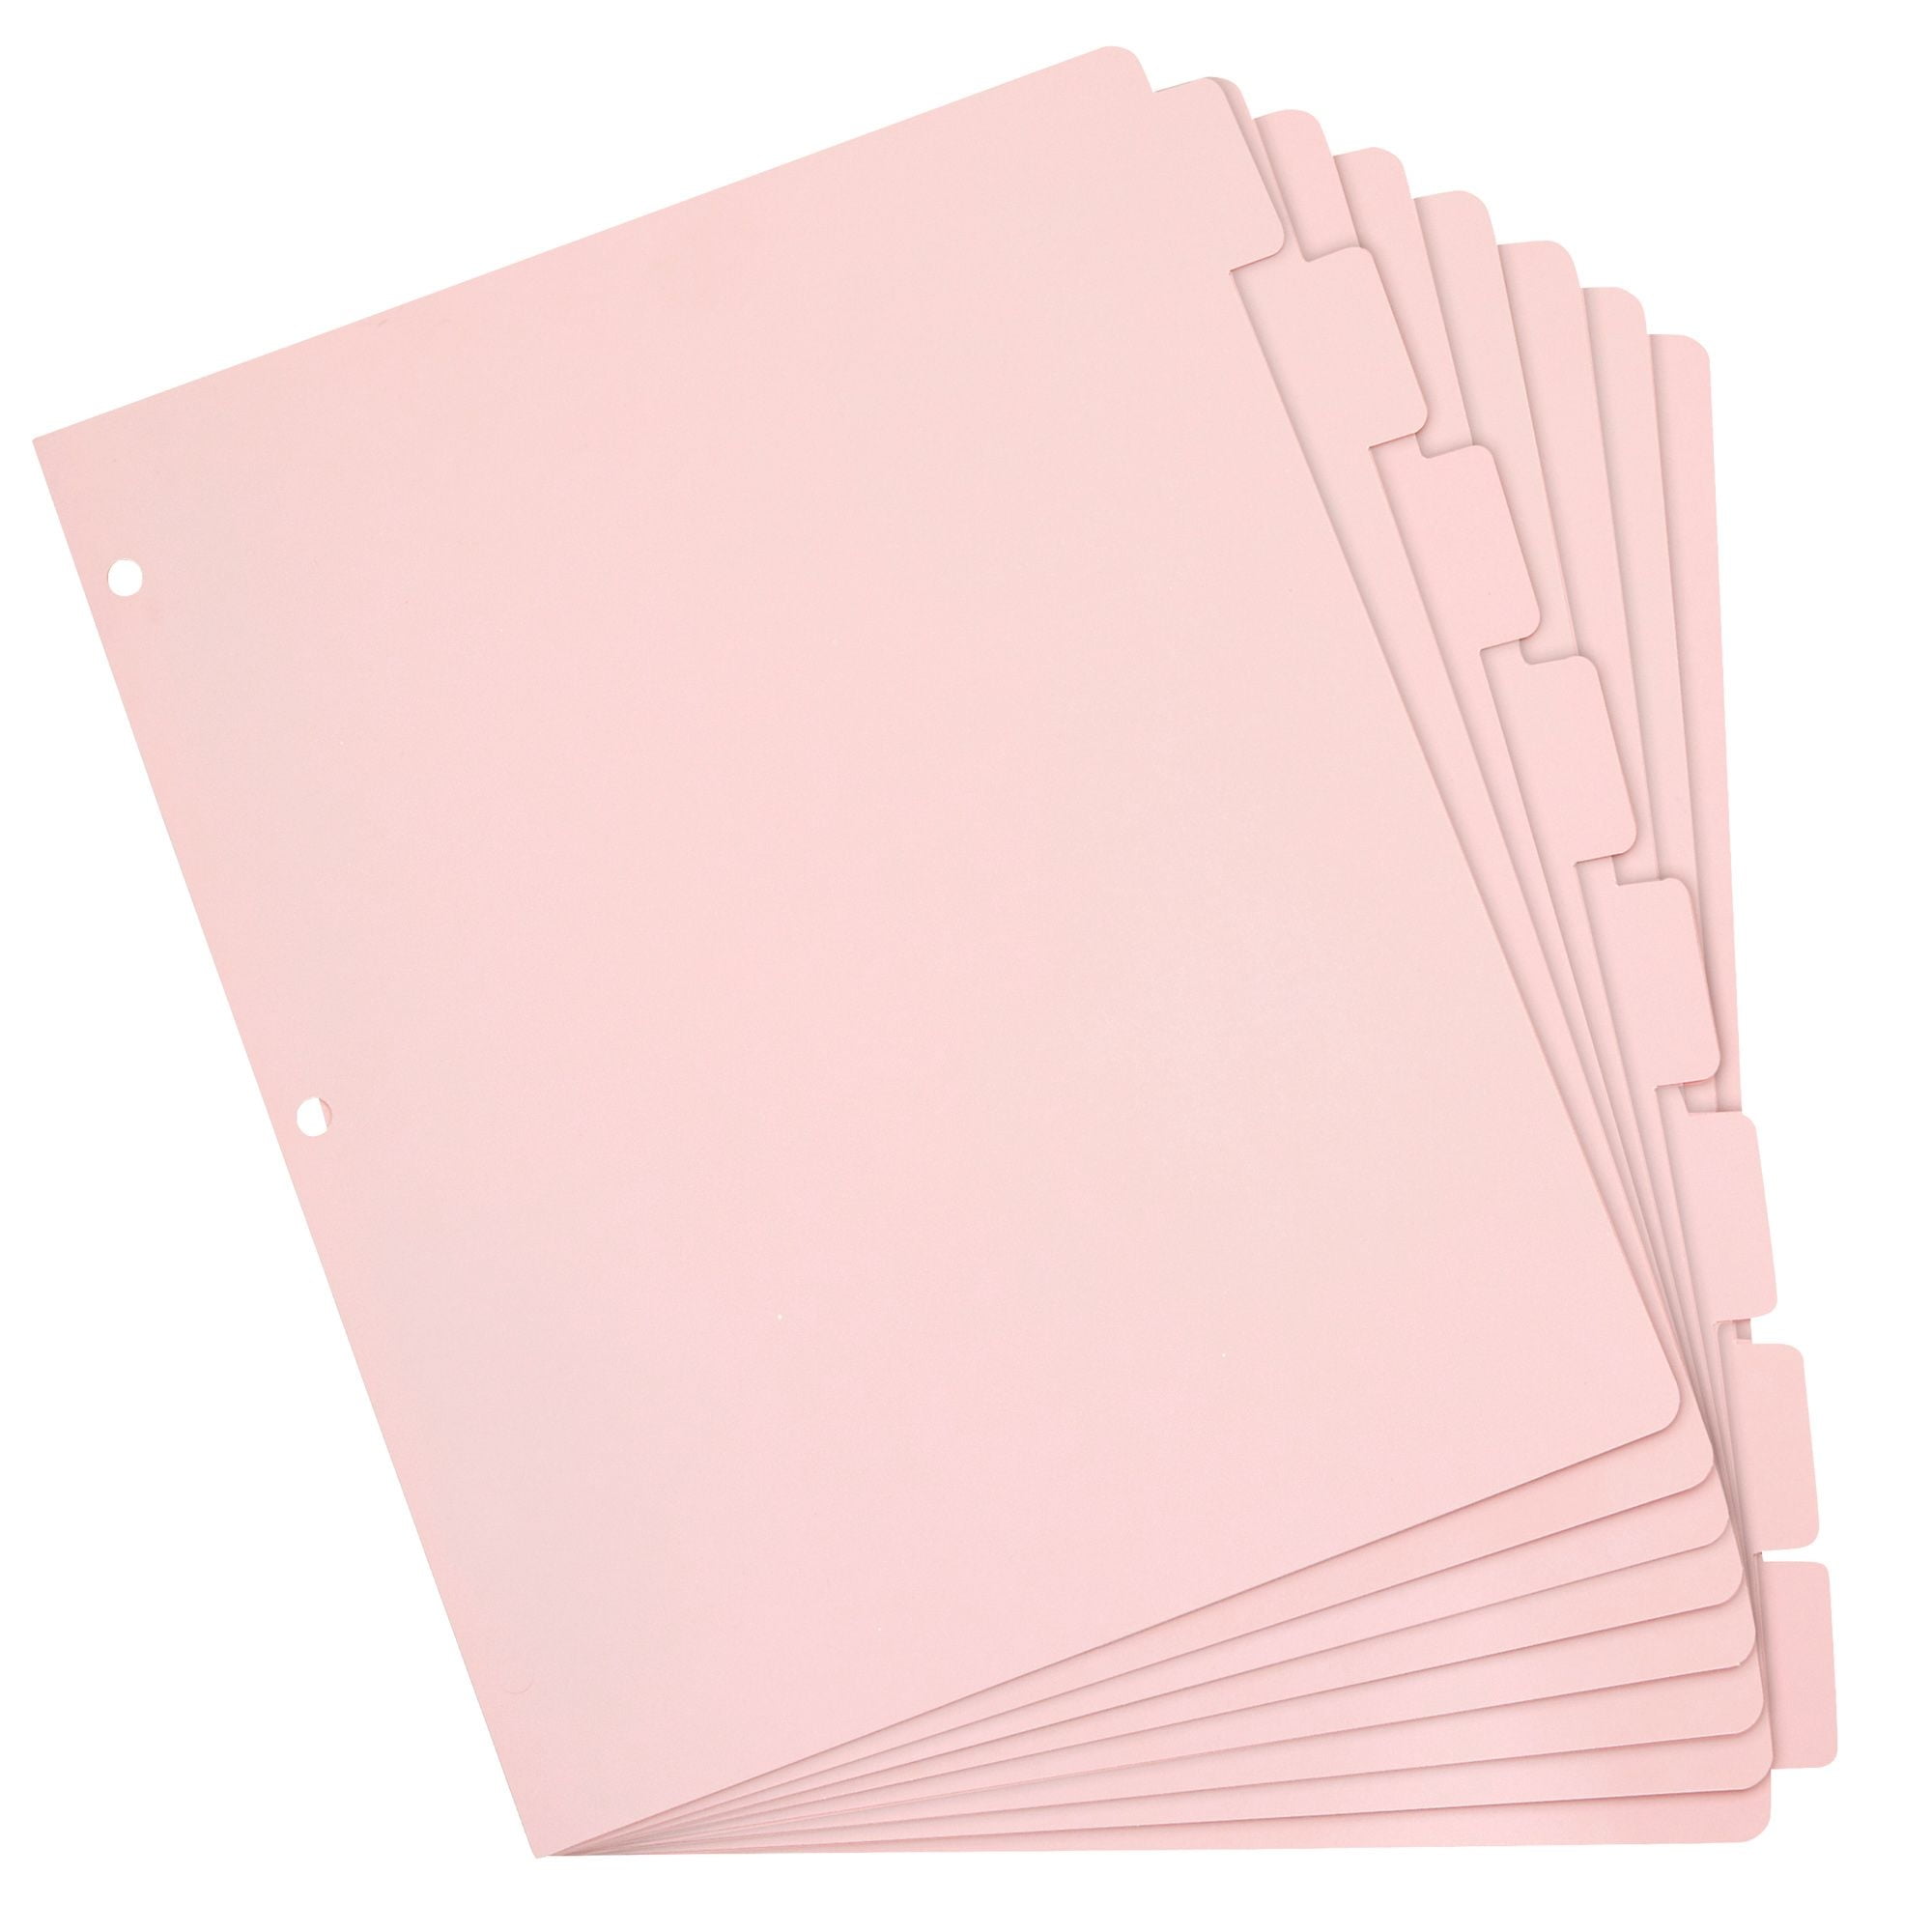 12 Sets Pink 8 Tab Dividers for Ring Binder, Paper Binder Separators Tabs, Pack of 96 Total Page Dividers for School, Work, Home, Office Supplies (Letter Size, 9.5x11 in) - Walmart.com